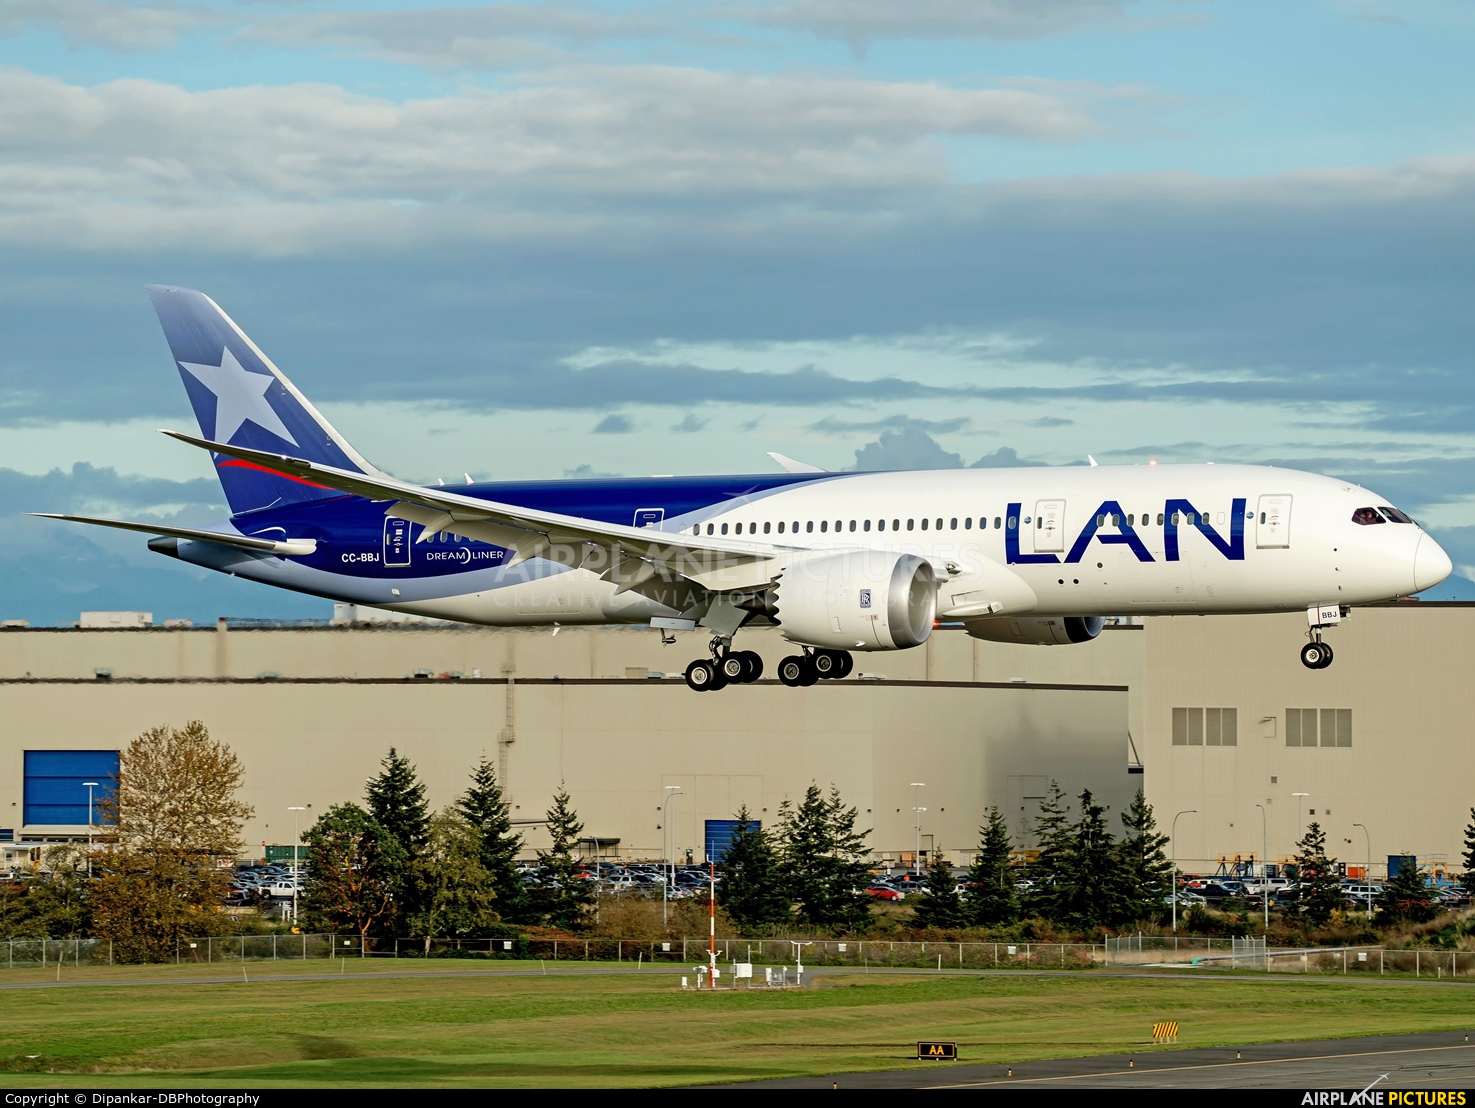 LAN Airlines CC-BBJ aircraft at Everett - Snohomish County / Paine Field